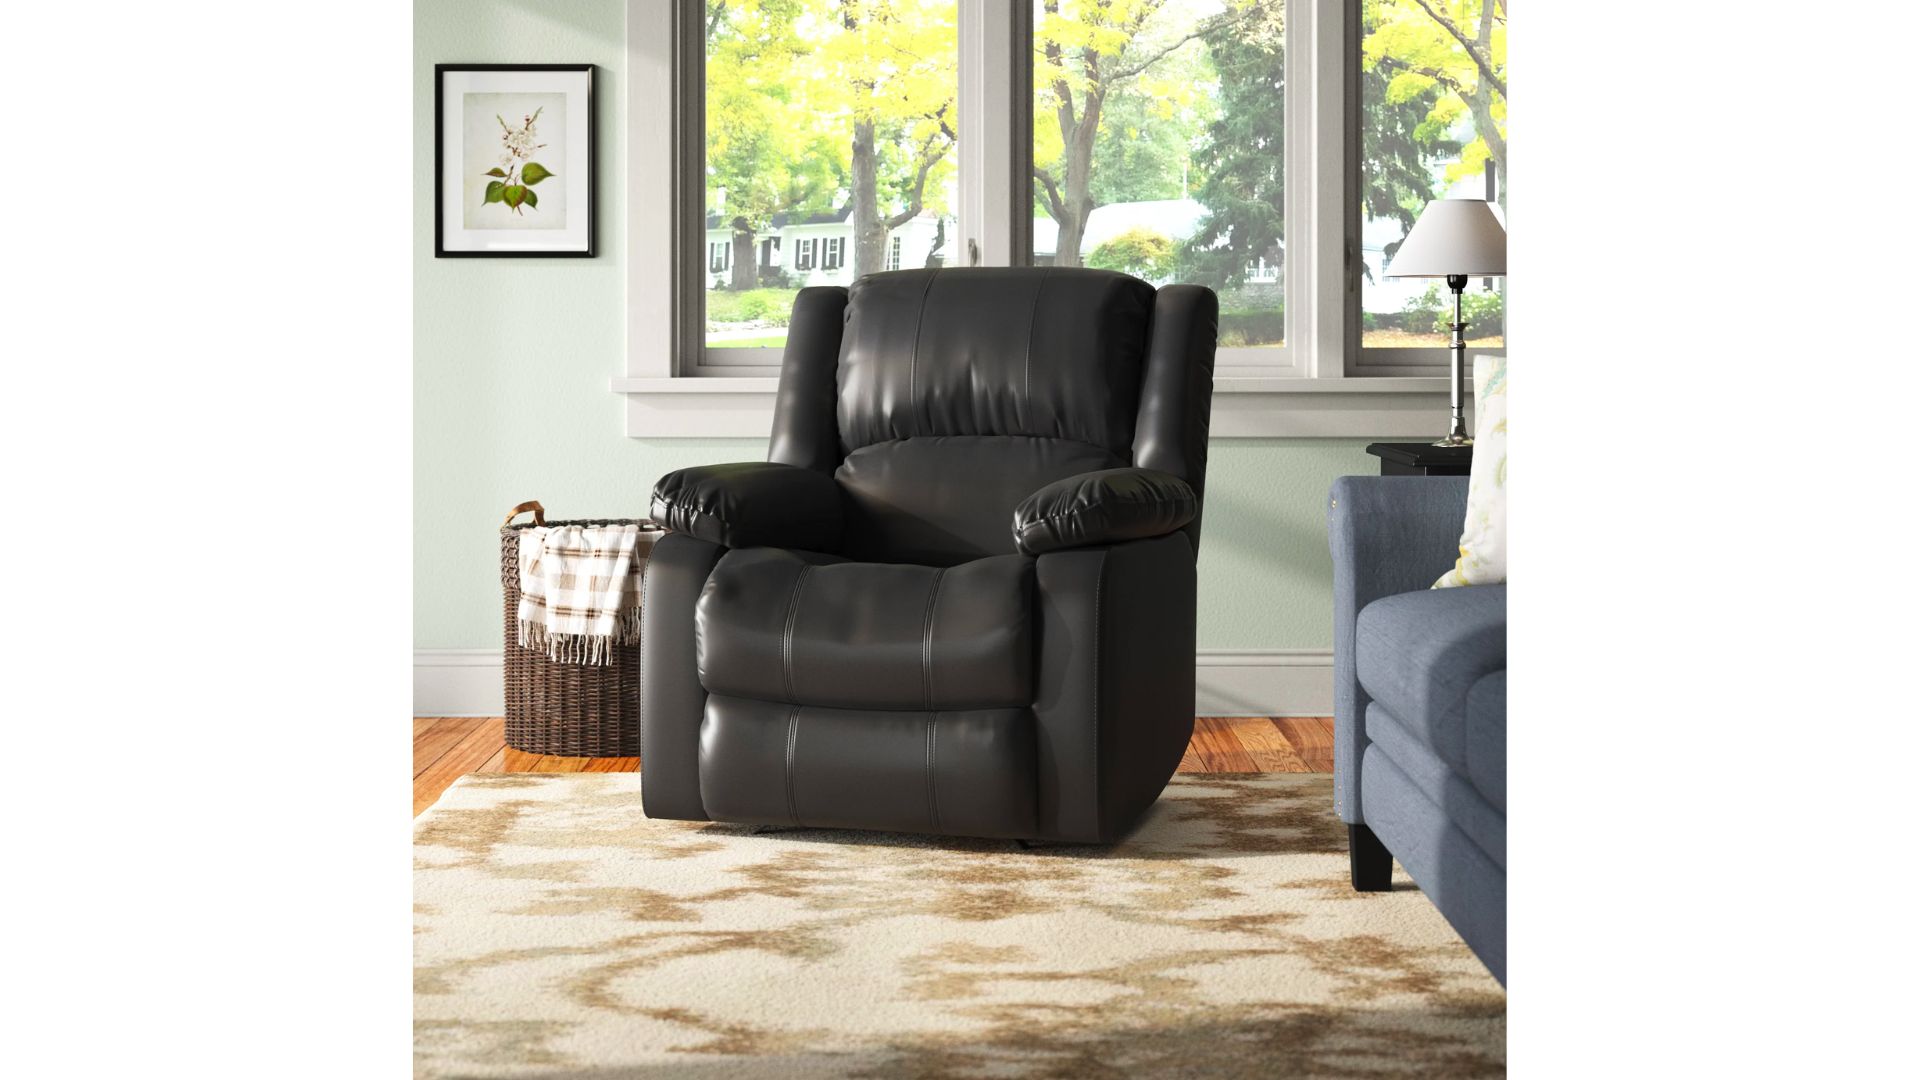 Best Recliners For Sleeping